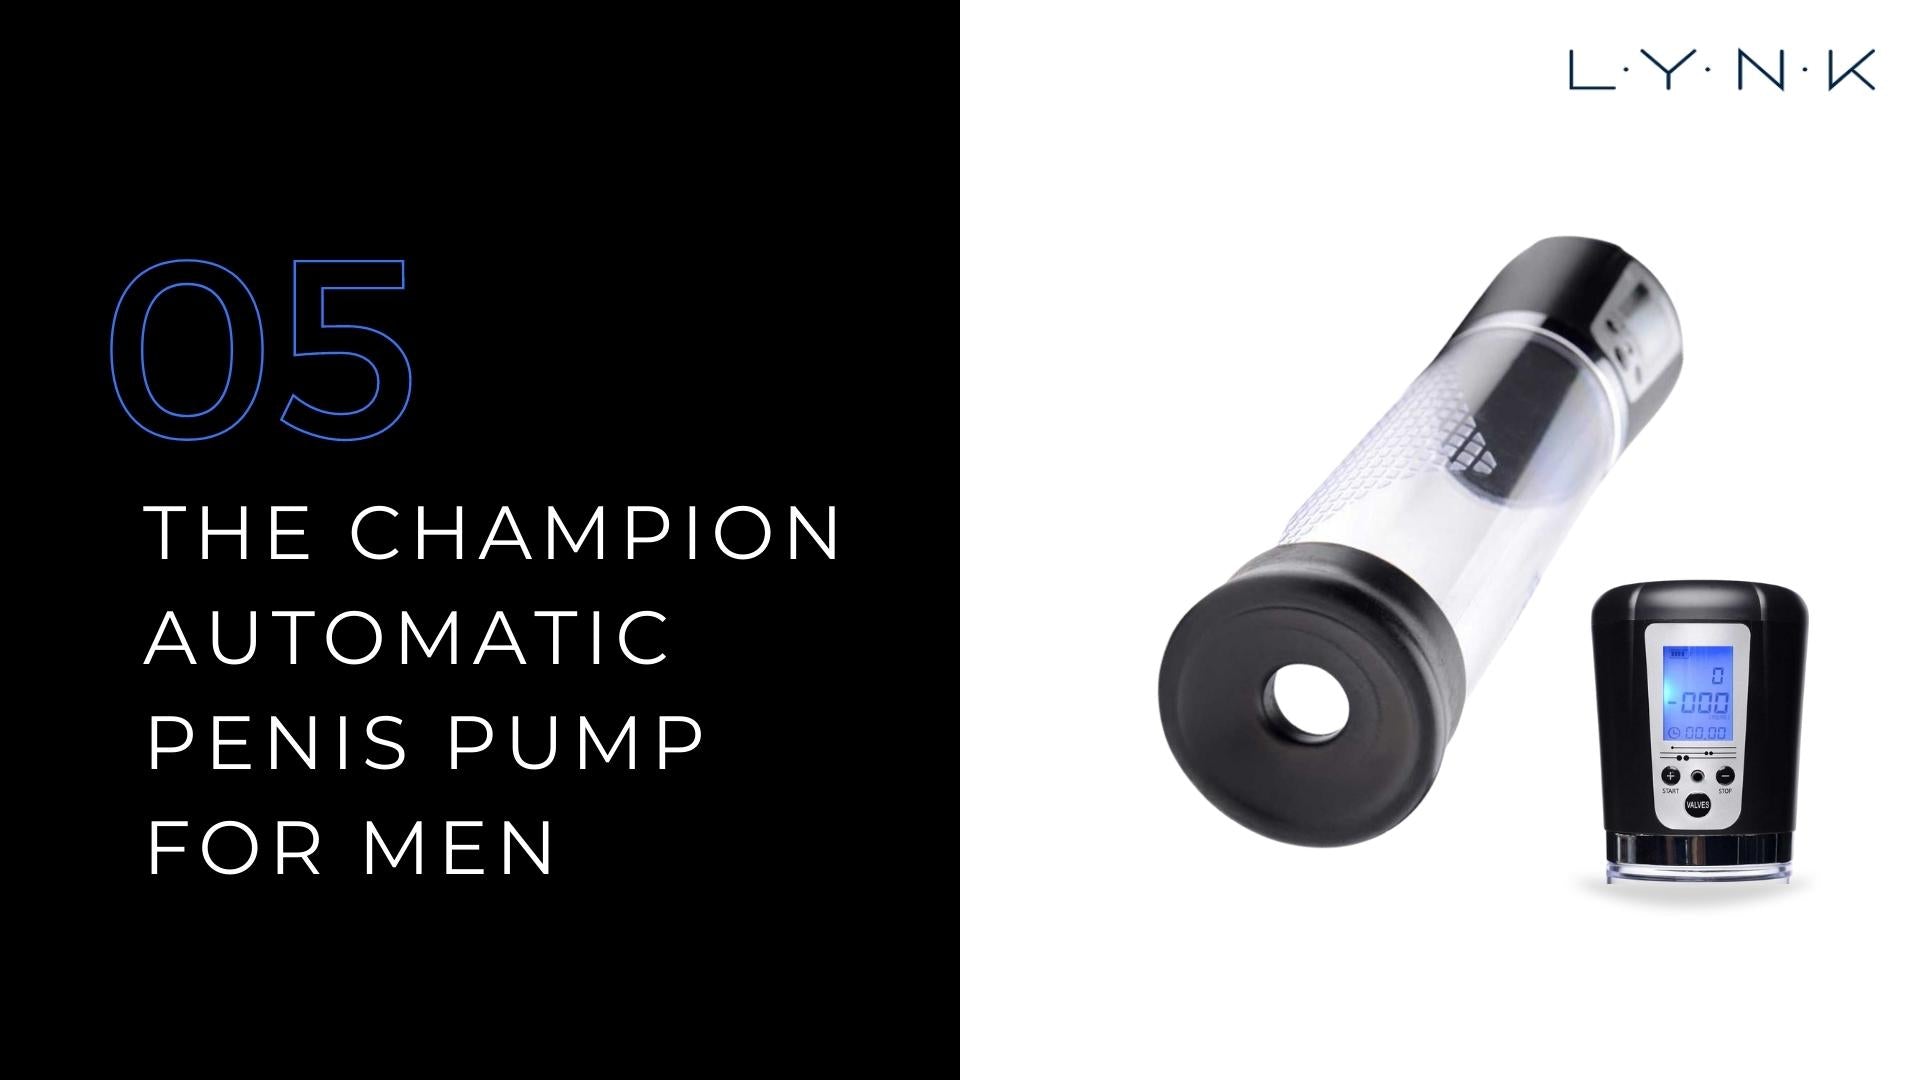 The Champion Automatic Penis Pump for Men